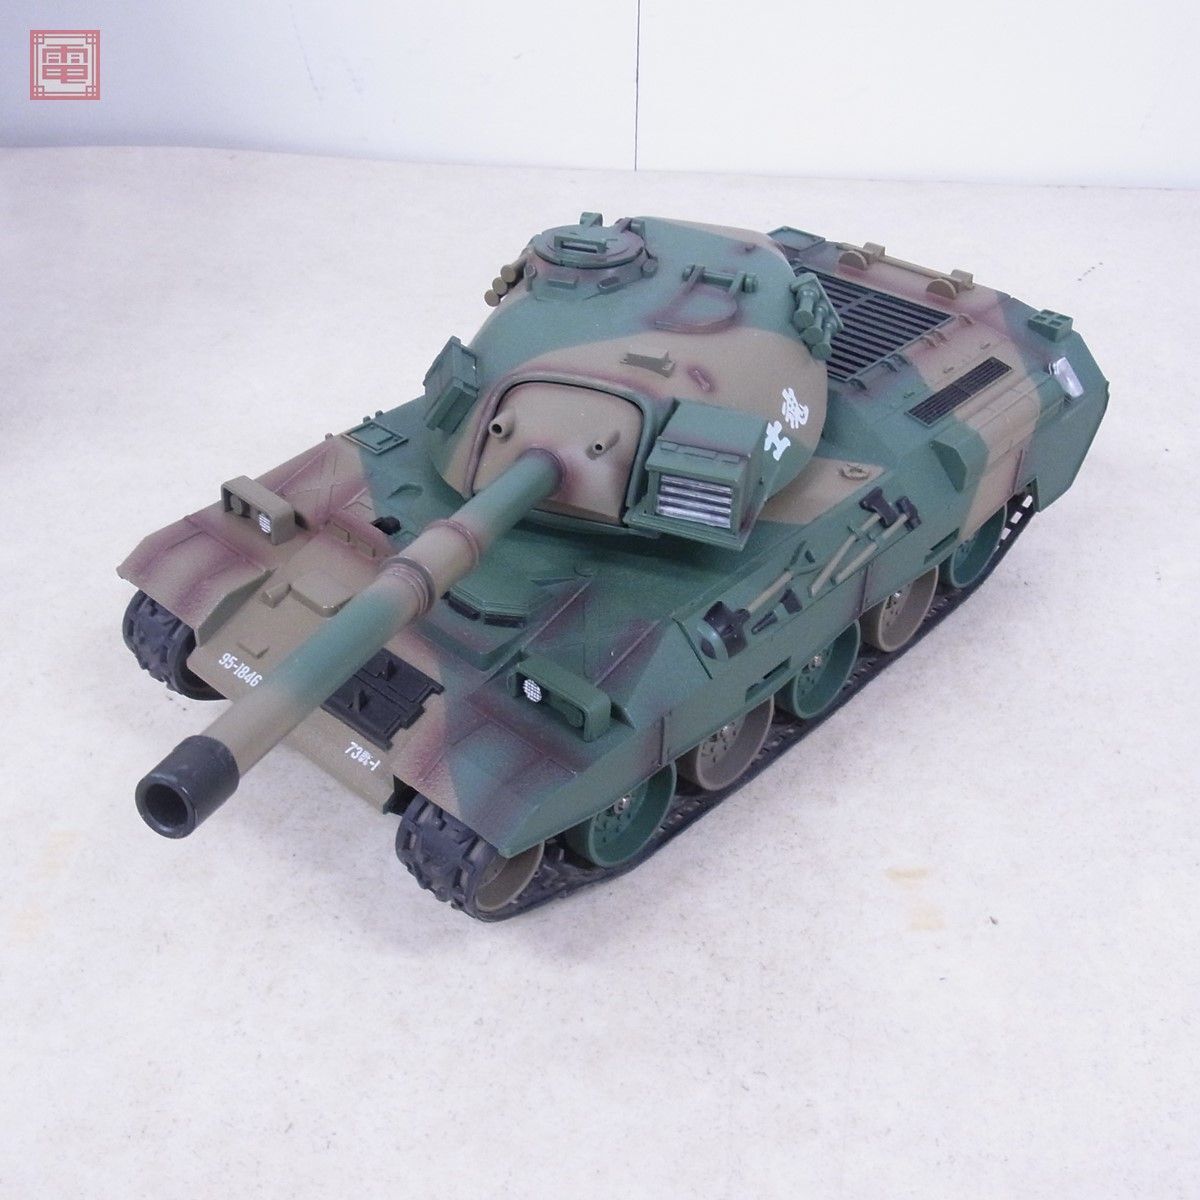  Kyosho EGG RC Battle tanker series Ground Self-Defense Force 74 type tank KYOSHO radio-controller operation not yet verification present condition goods [40